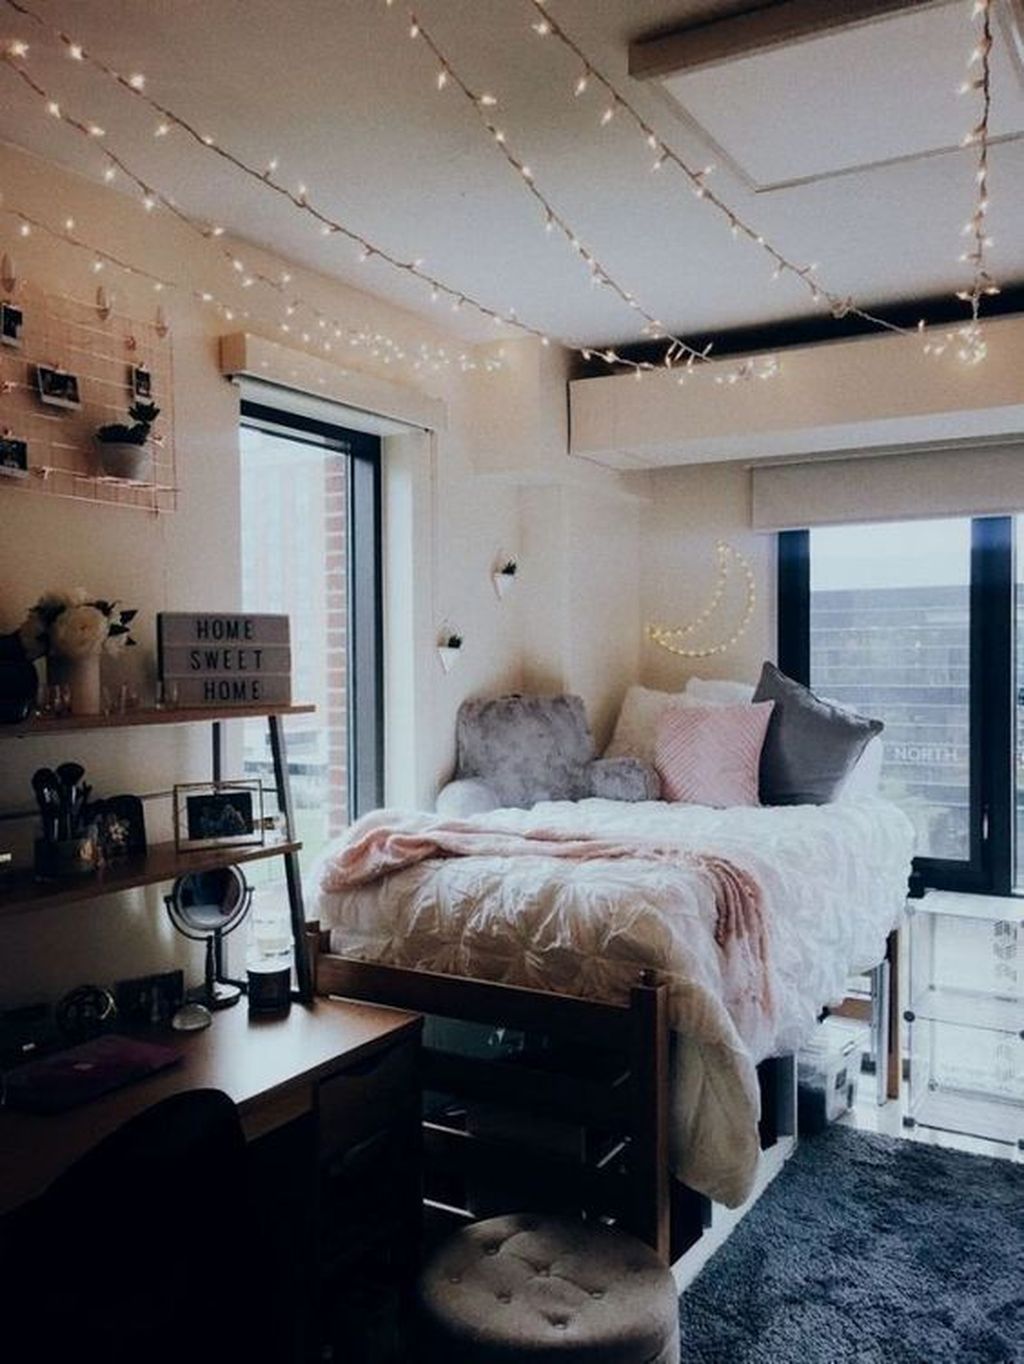 32 Cool Dorm Room Ideas To Maximize Your Space - SWEETYHOMEE